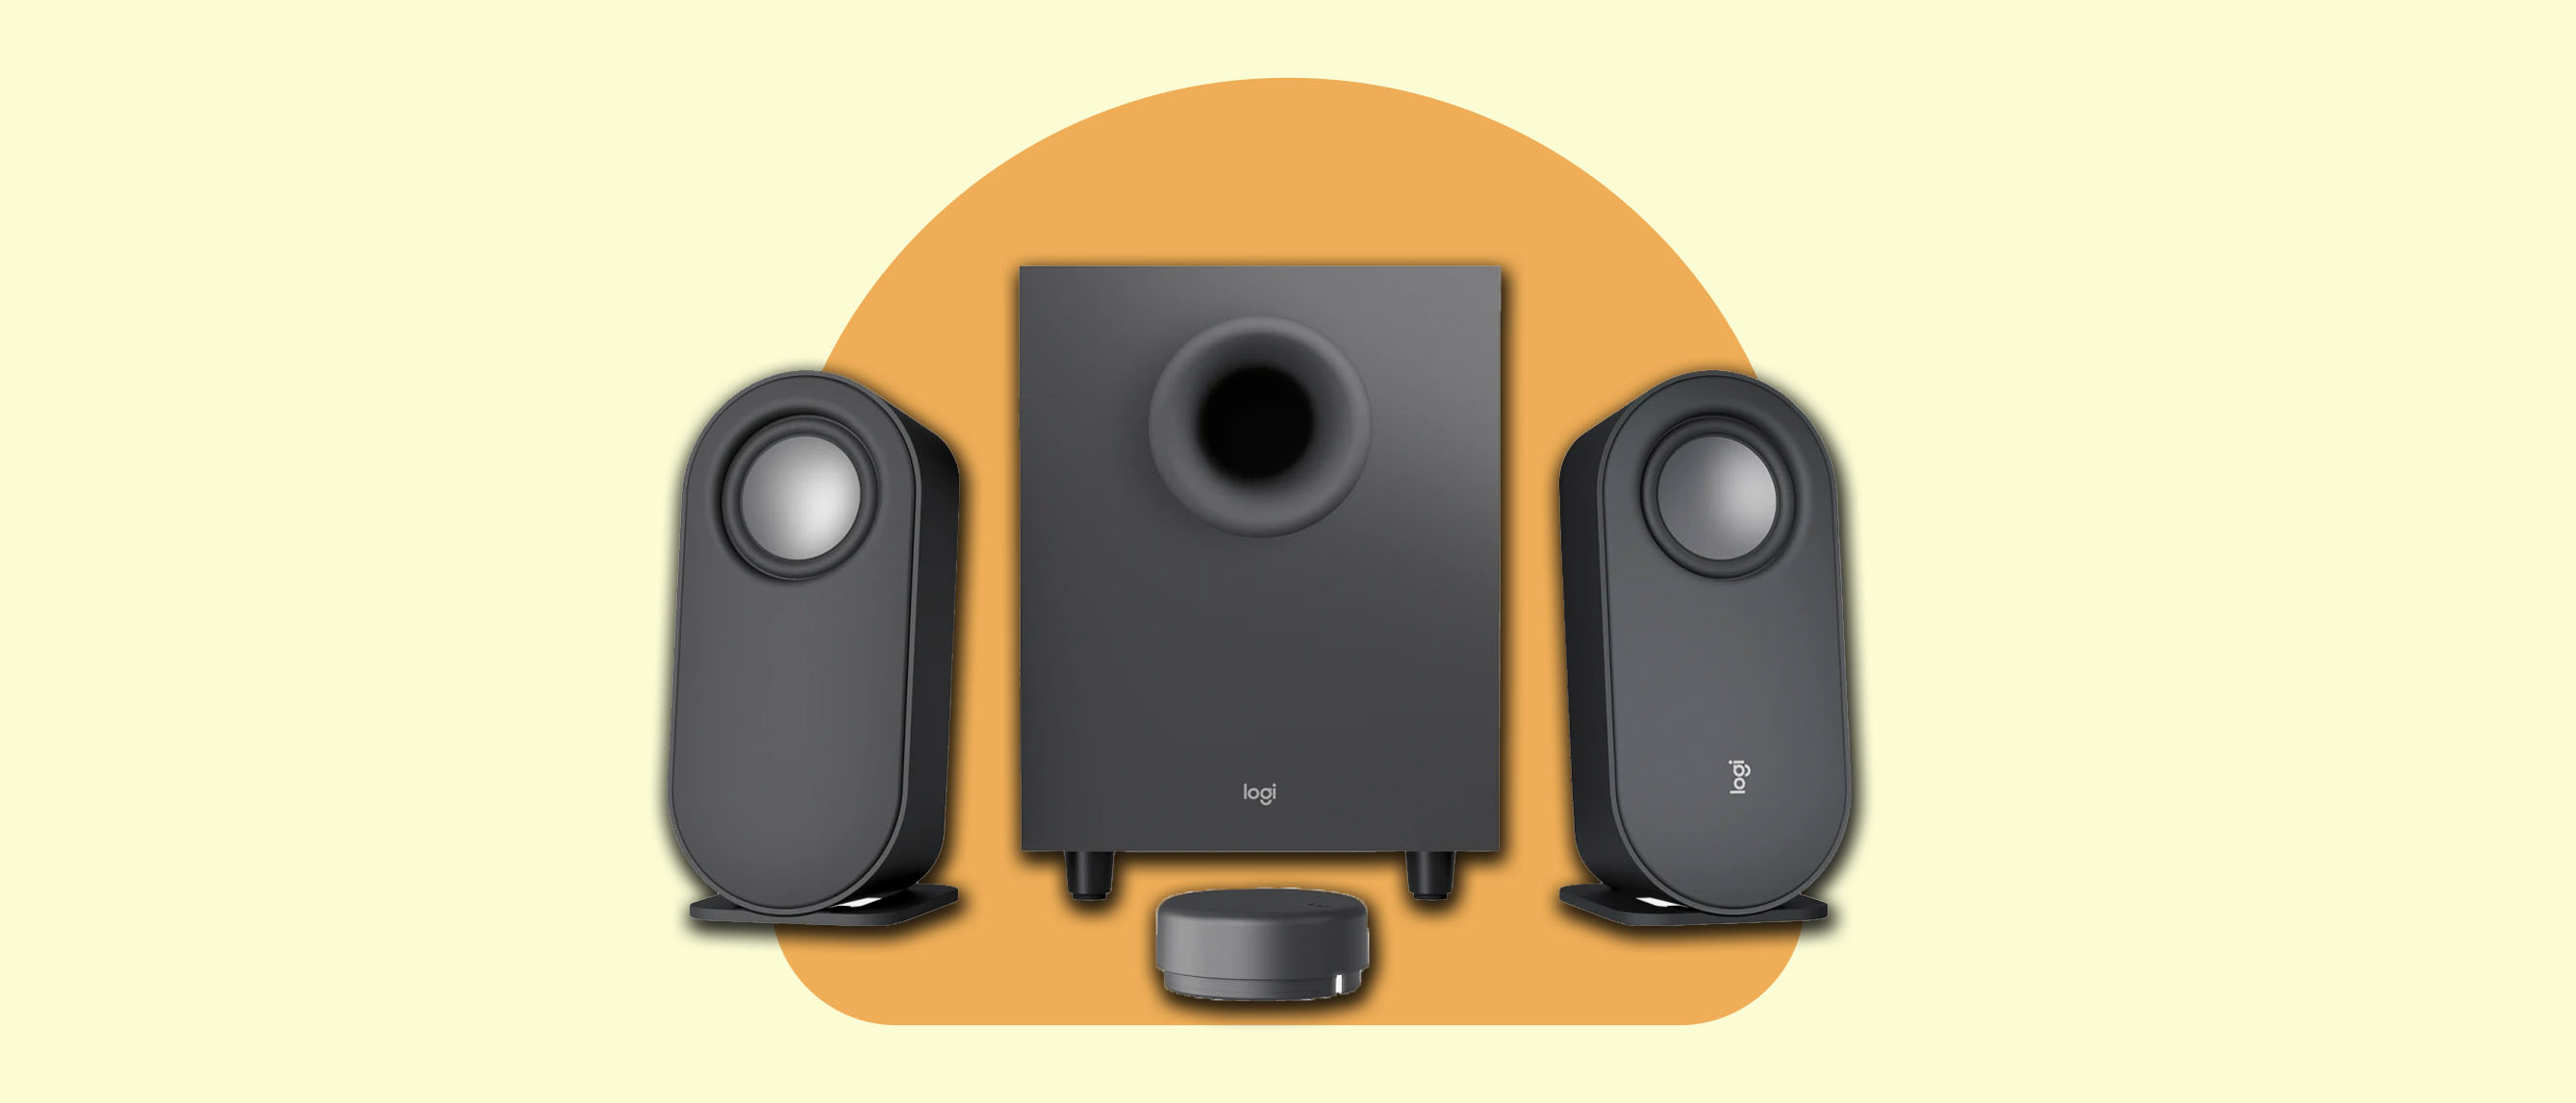 Image of black Logitech speakers with subwoofer